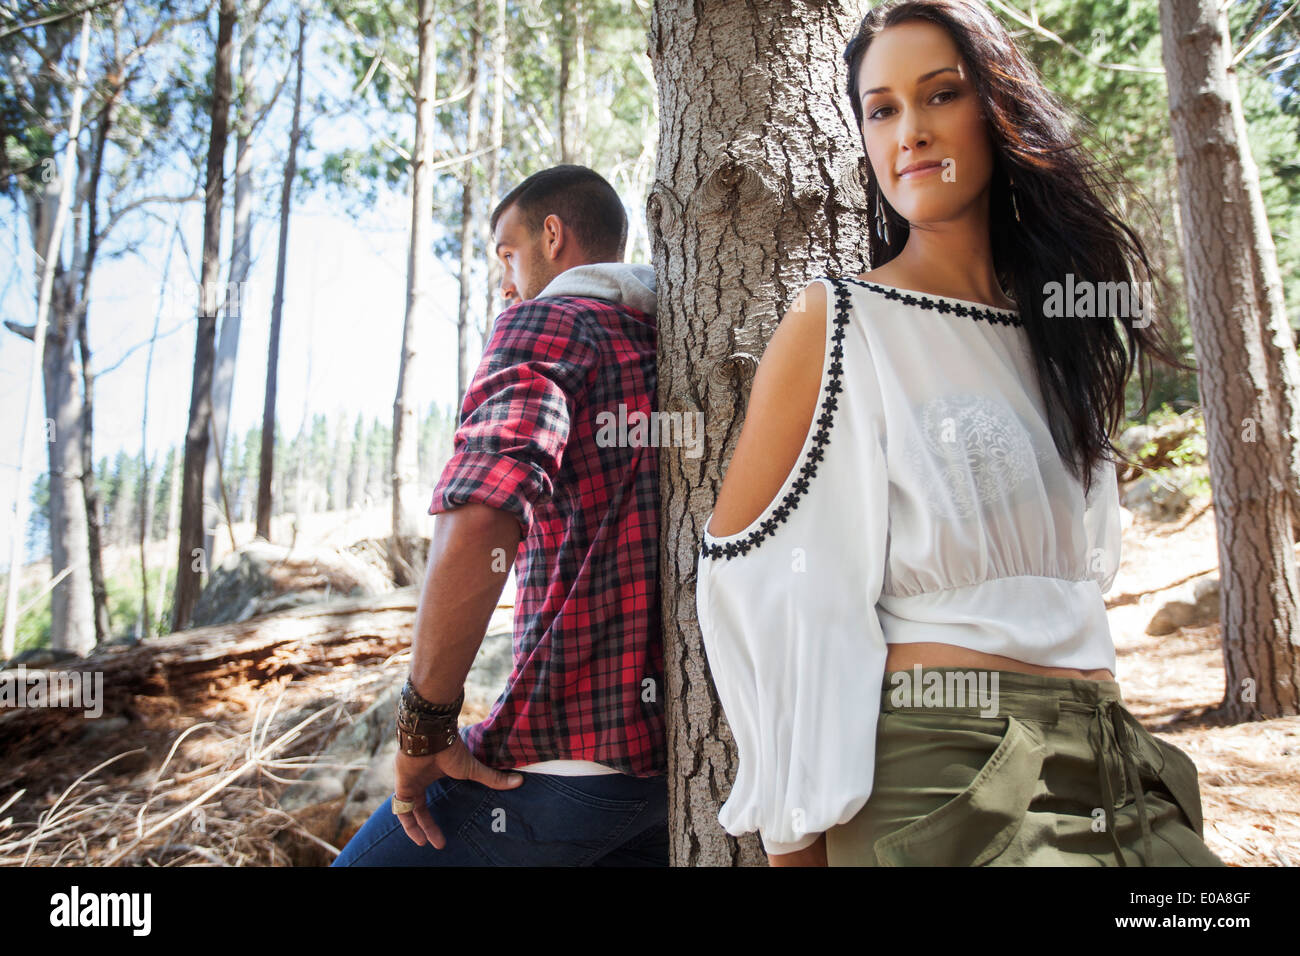 Young couple leaning against tree in forest Stock Photo